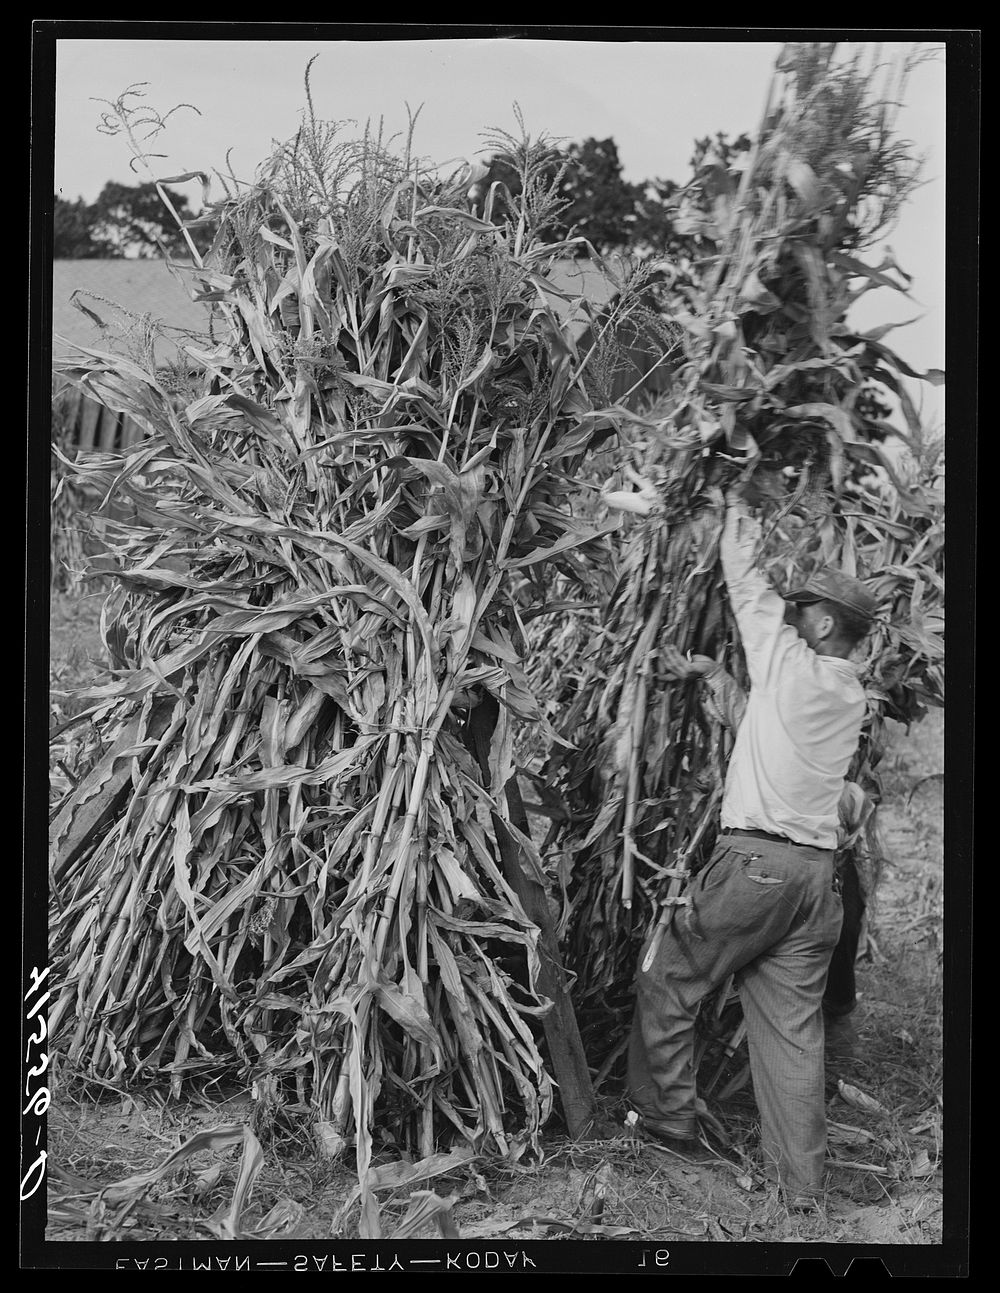 [Untitled photo, possibly related to: Stacking corn on a farm near Windsor Locks, Connecticut]. Sourced from the Library of…